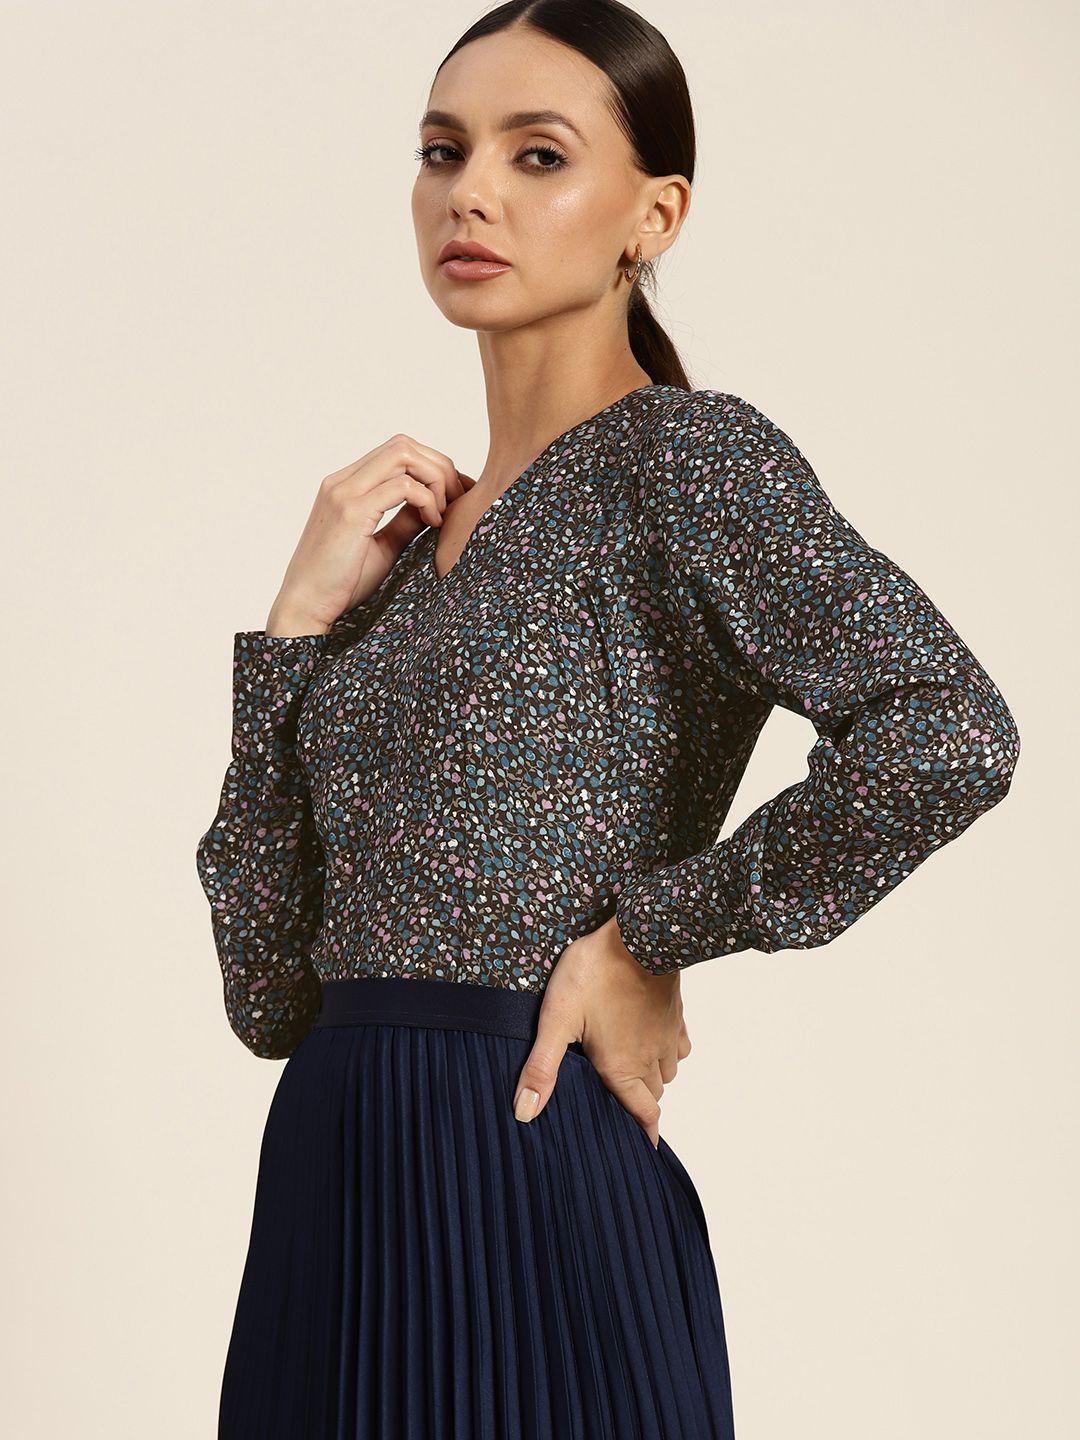 her by invictus black & blue floral print shirt style top